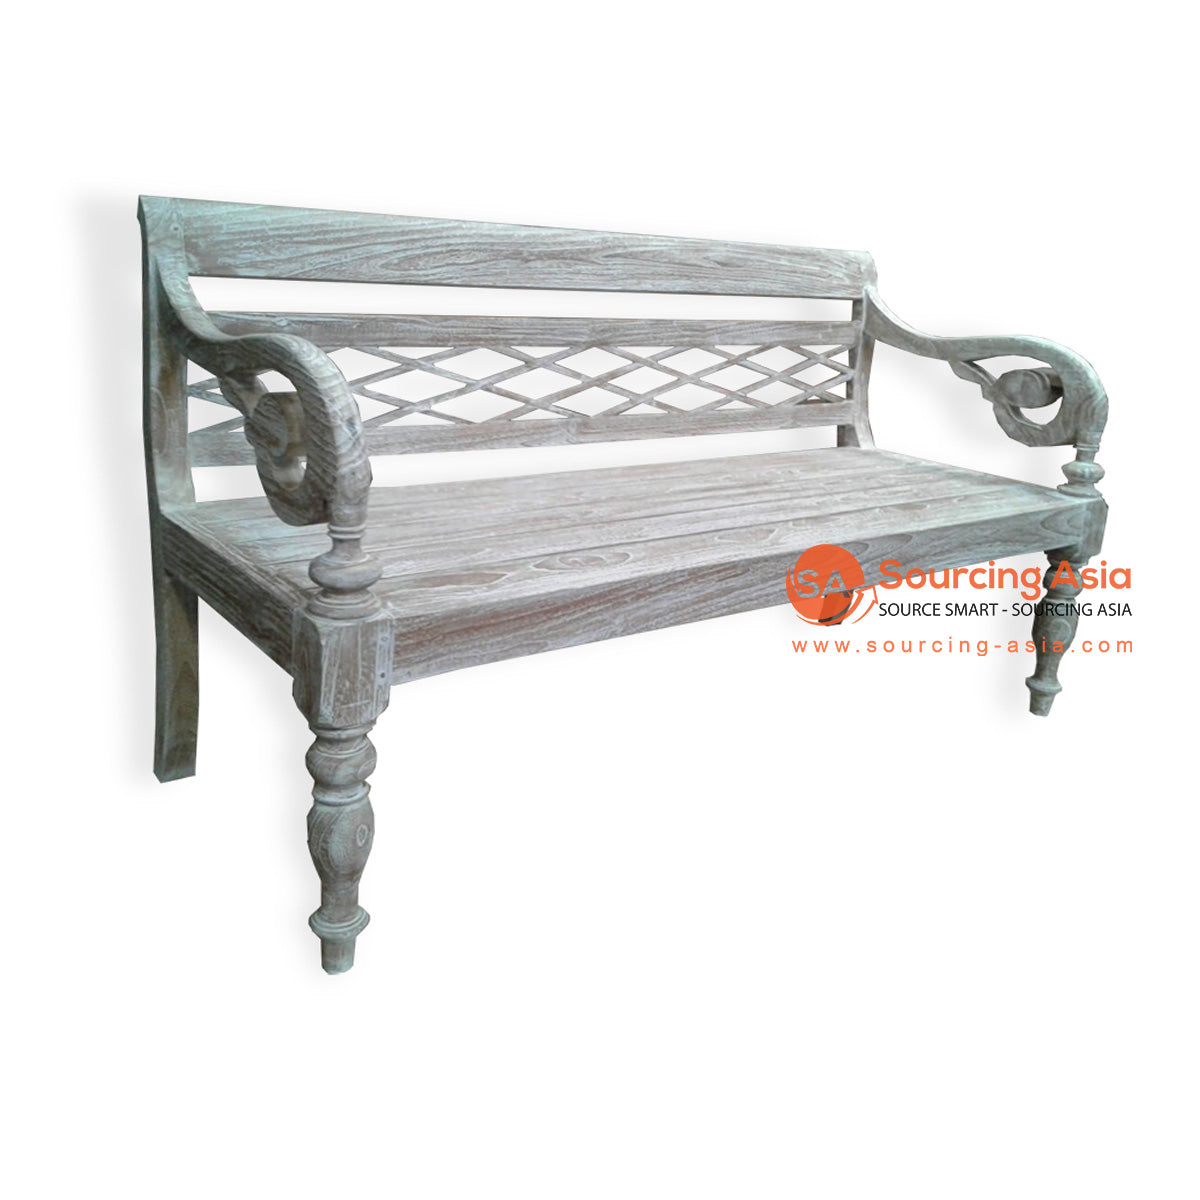 LAC054 WHITE WASH TEAK WOOD COLONIAL ARMED BENCH